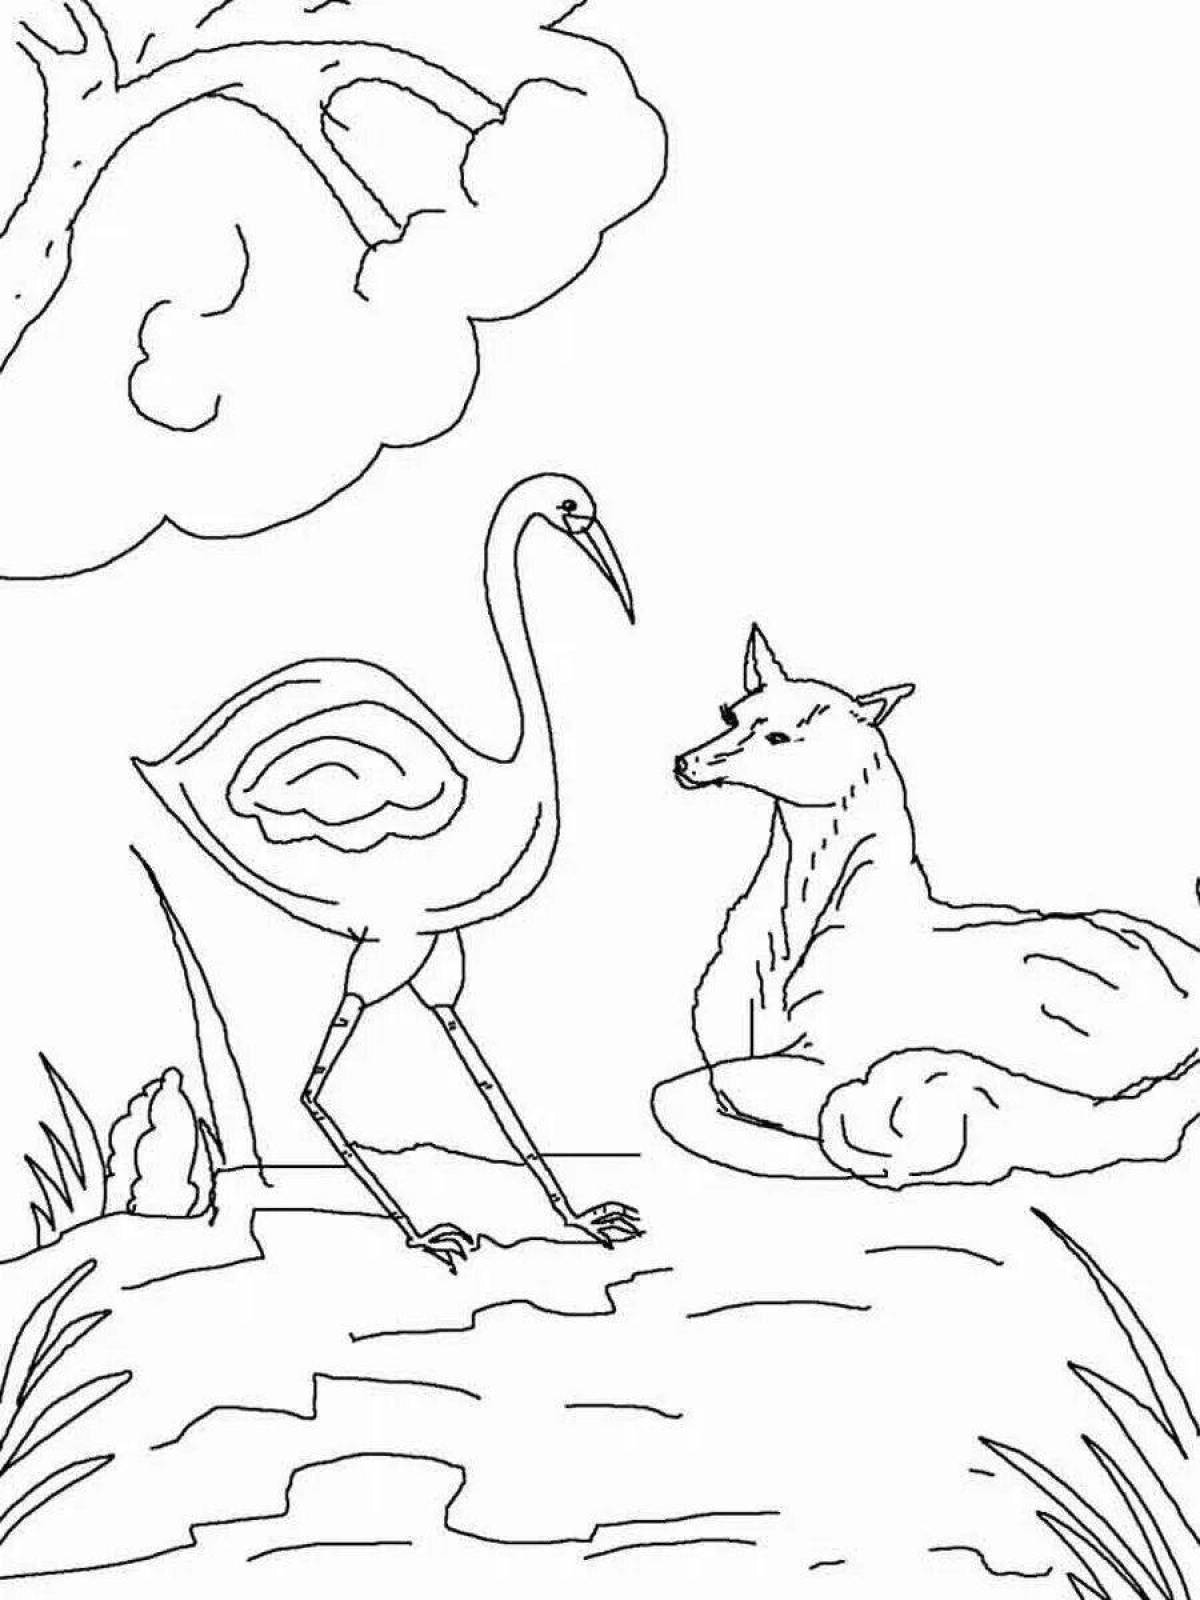 Amazing fox and crane coloring pages for kids